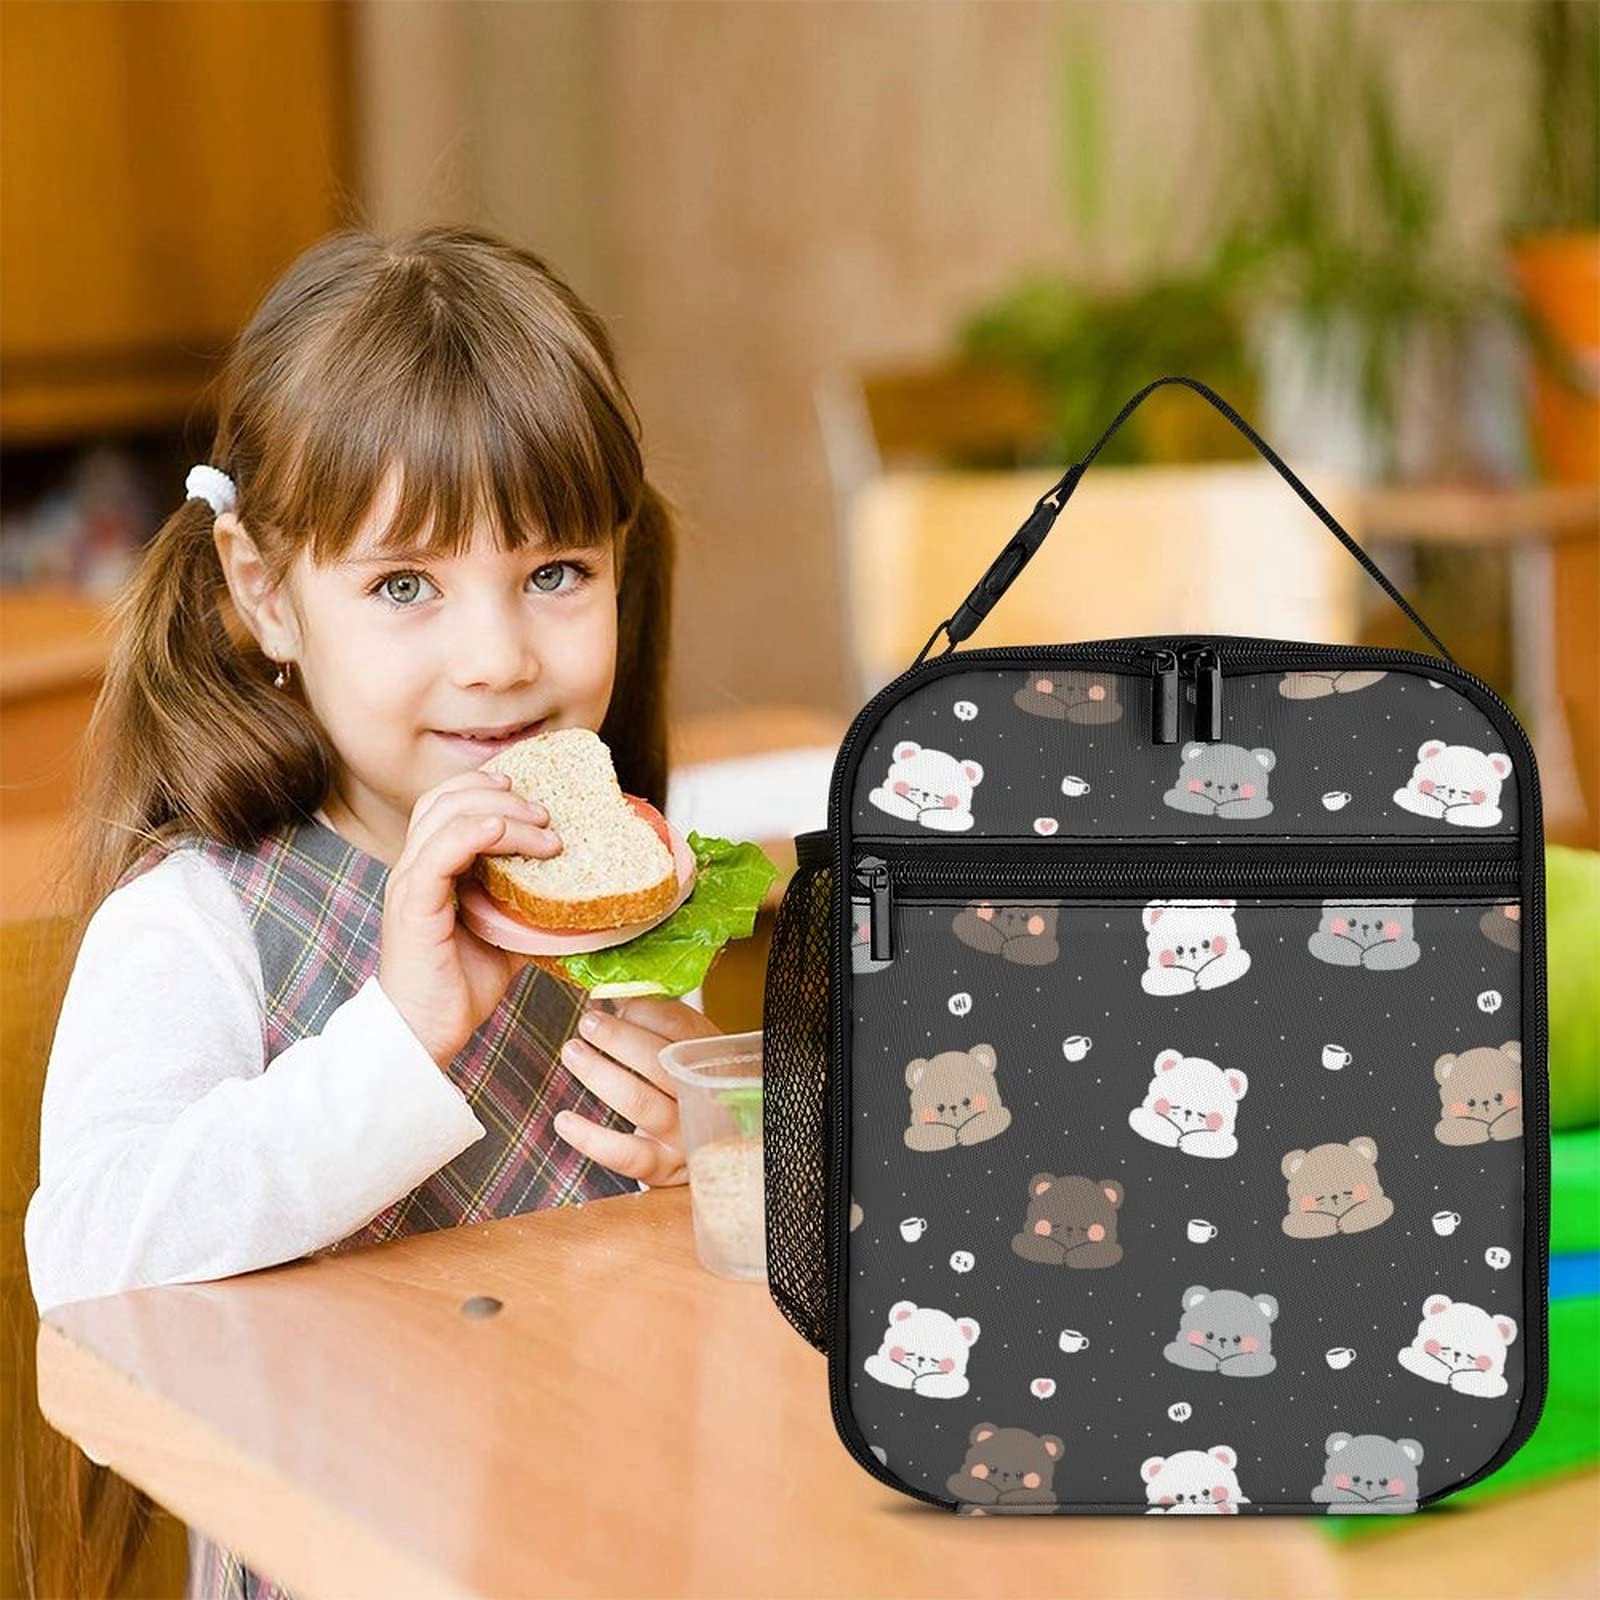 MINBHEBYUD Cute Cartoon Bear Lunch Bag for Men Women, Insulated Lunch Bags for Office Work, Reusable Portable Lunch Box